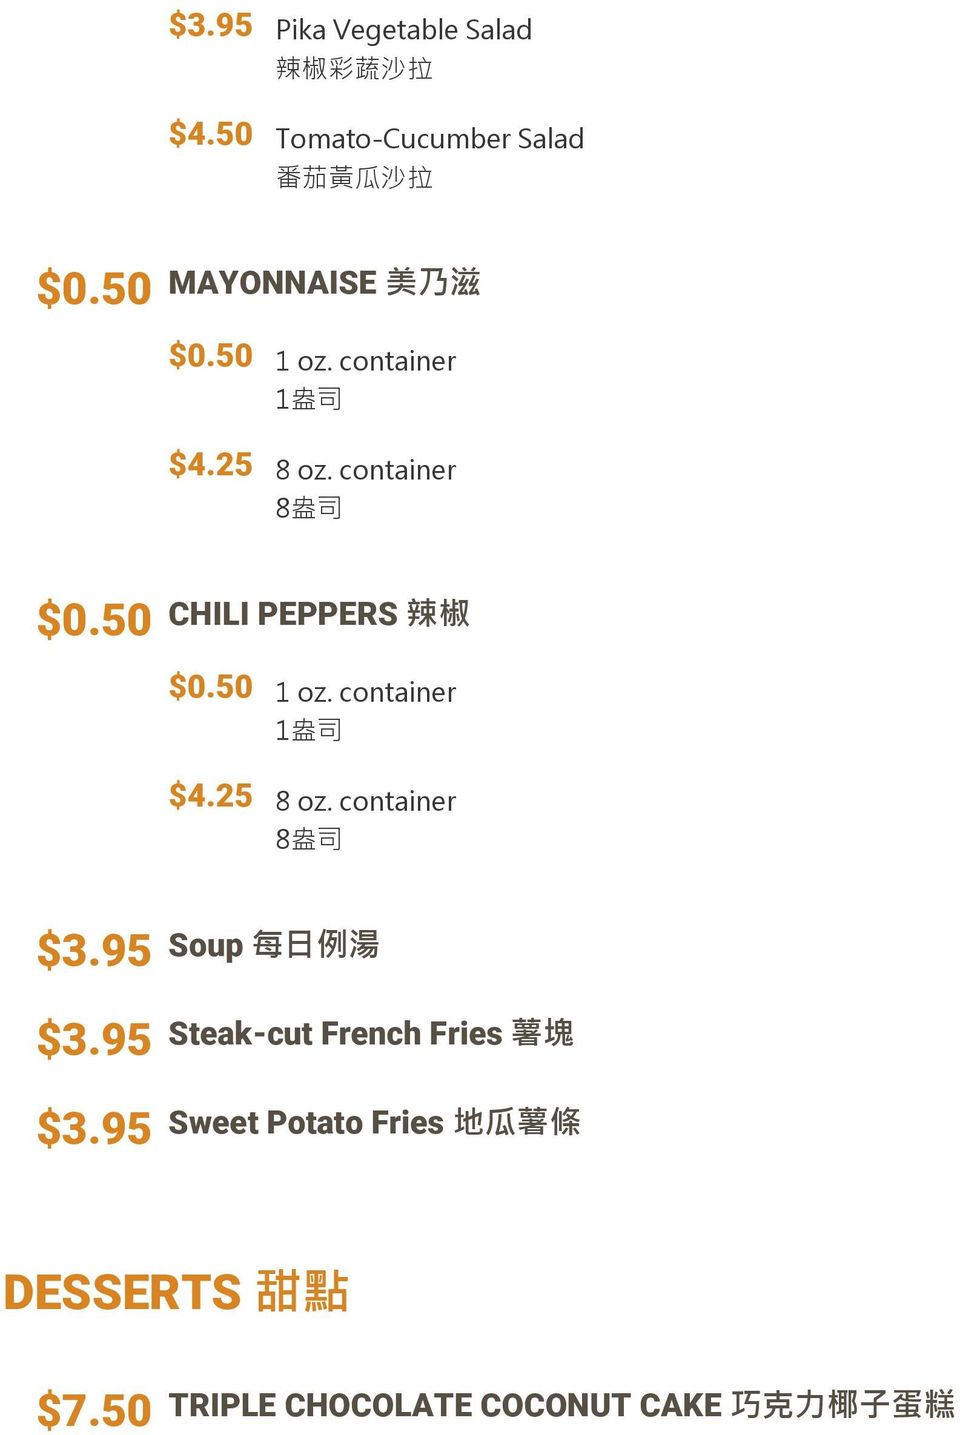 50 CHILI PEPPERS 辣 椒 $0.50 $4.25 1 oz. container 1 盎 司 8 oz. container 8 盎 司 $3.95 $3.